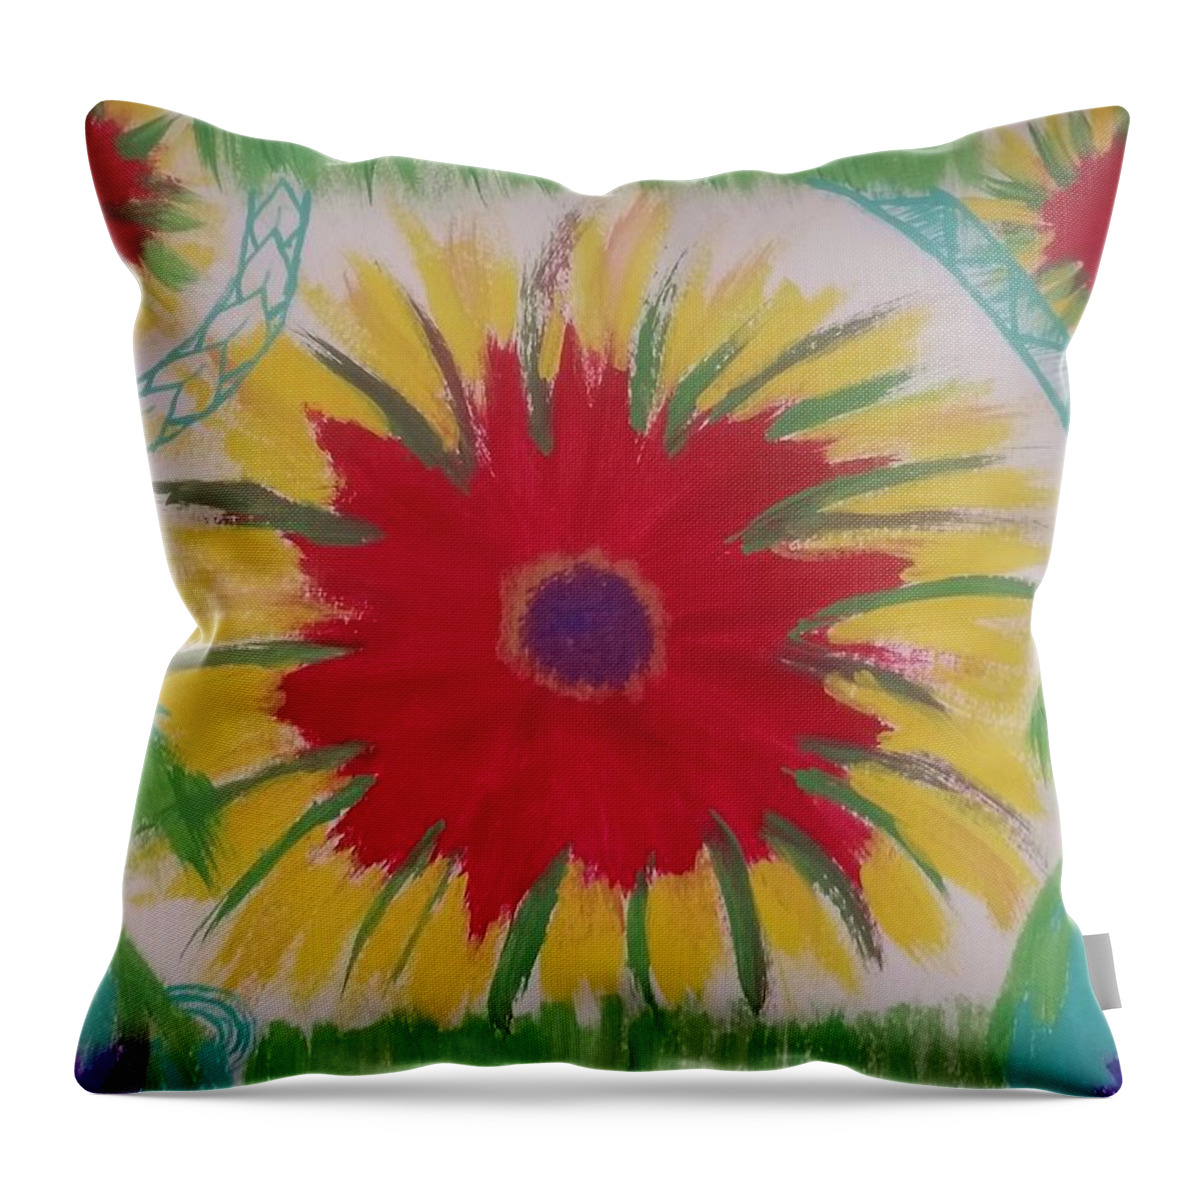 Flower Throw Pillow featuring the painting Polynesian Floral by Vale Anoa'i